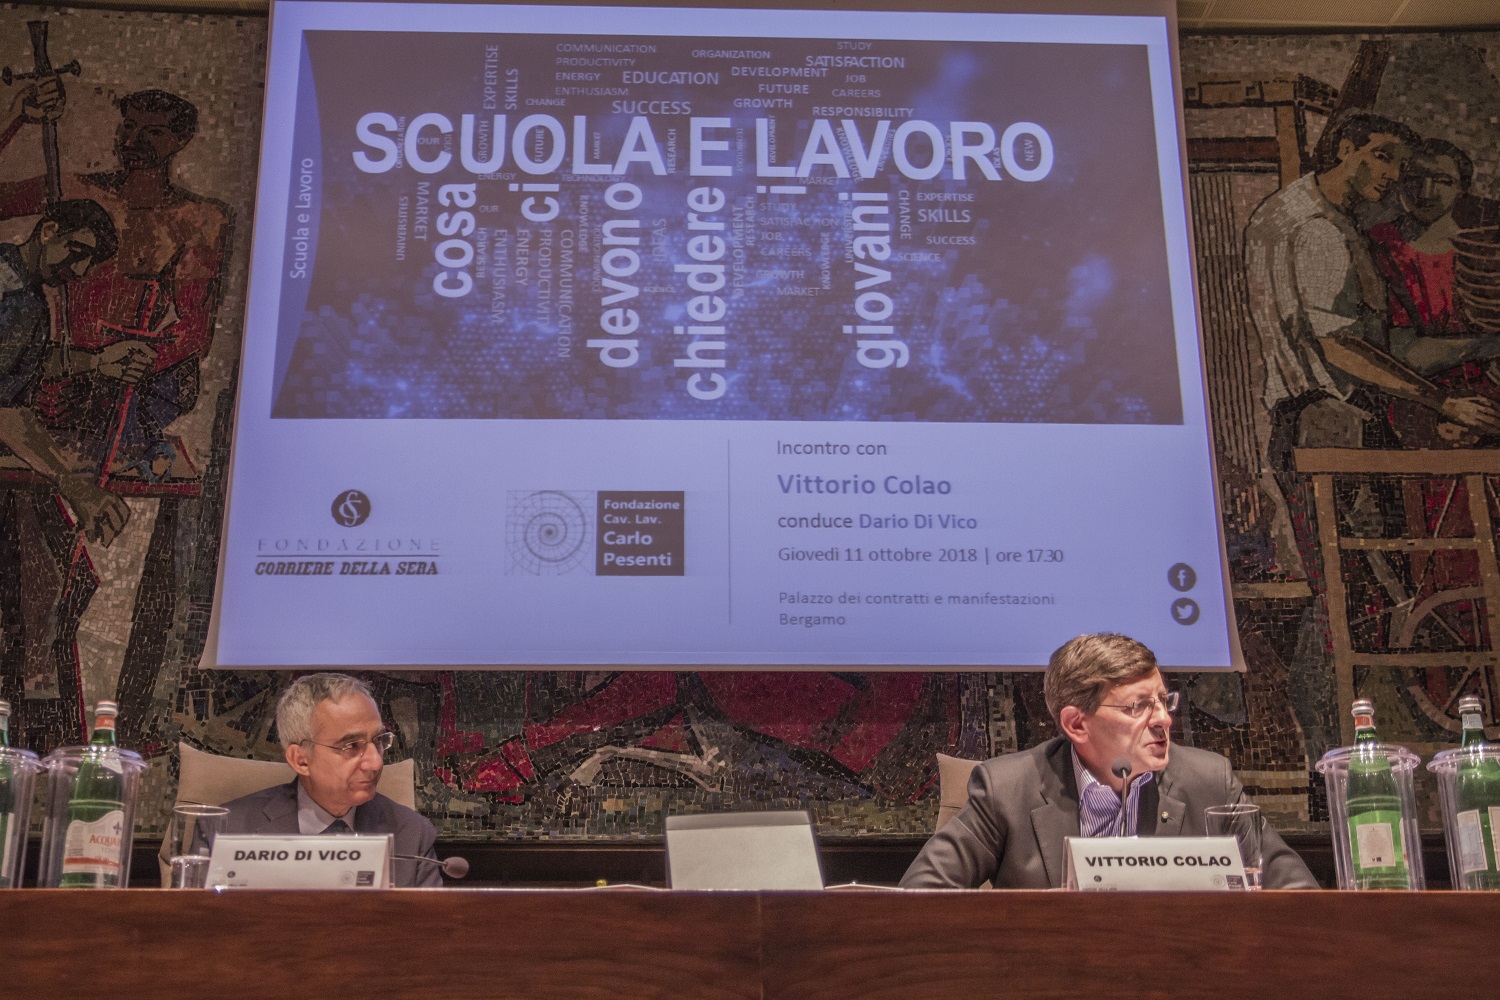 SCHOOL AND WORK | A CONFERENCE BY THE CORSERA AND PESENTI FOUNDATIONS